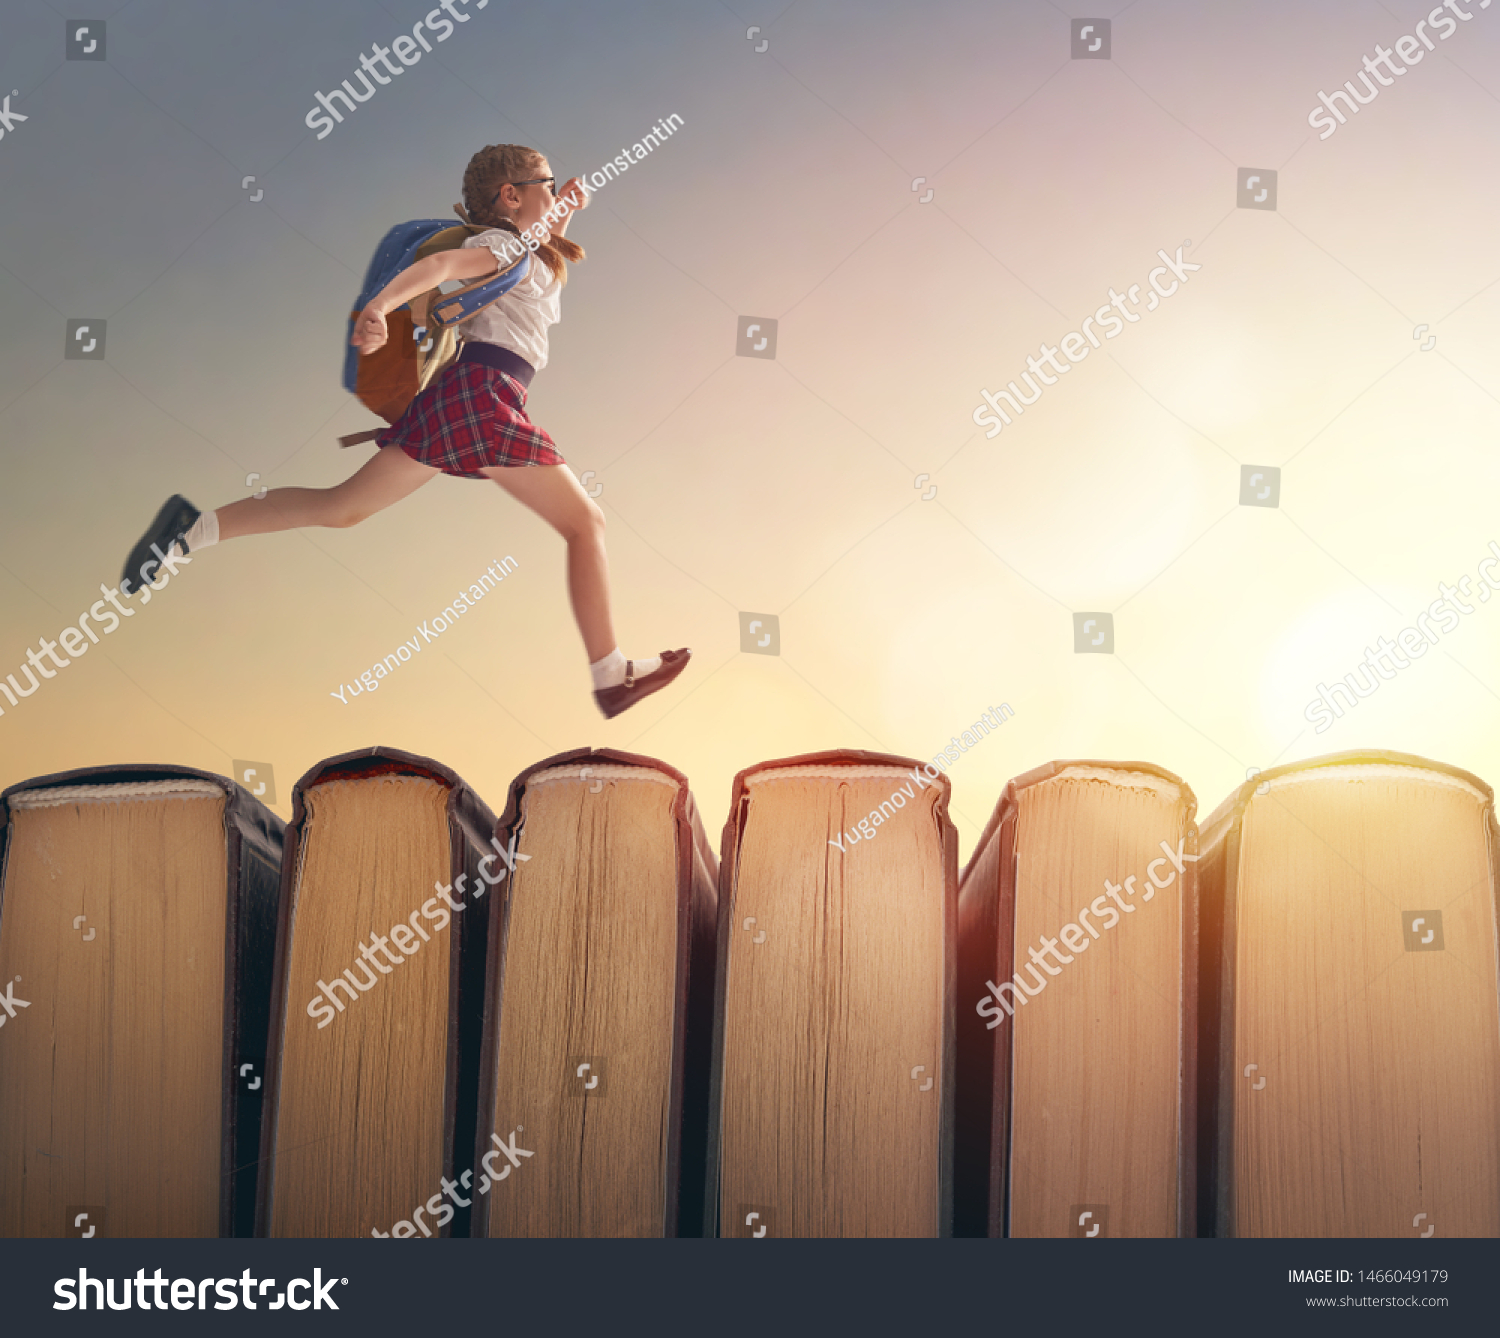 Back to school! Happy cute industrious child are running on books on background of sunset landscape. Concept of education and reading. The development of the imagination.                               #1466049179